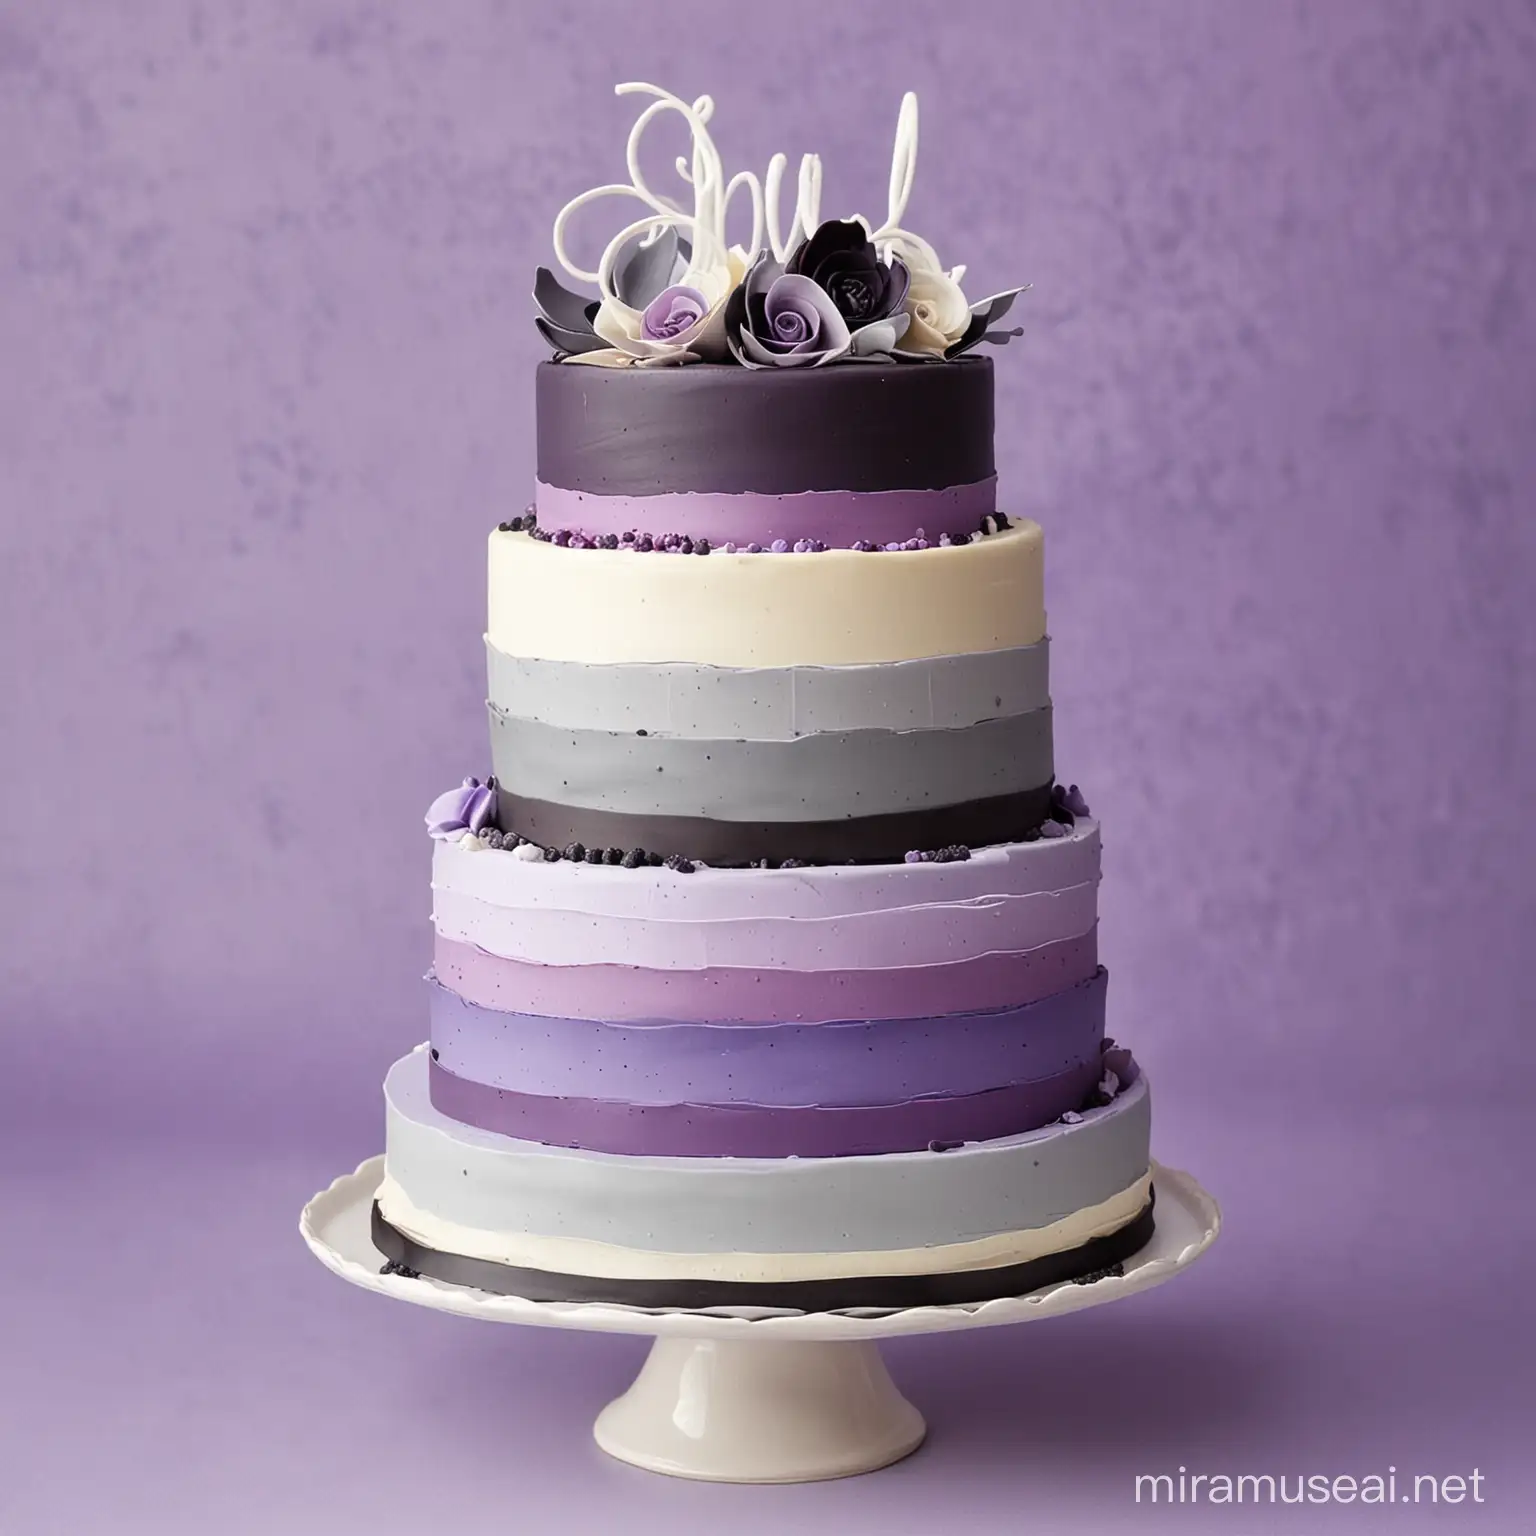 A three tiered cake in asexual colors 